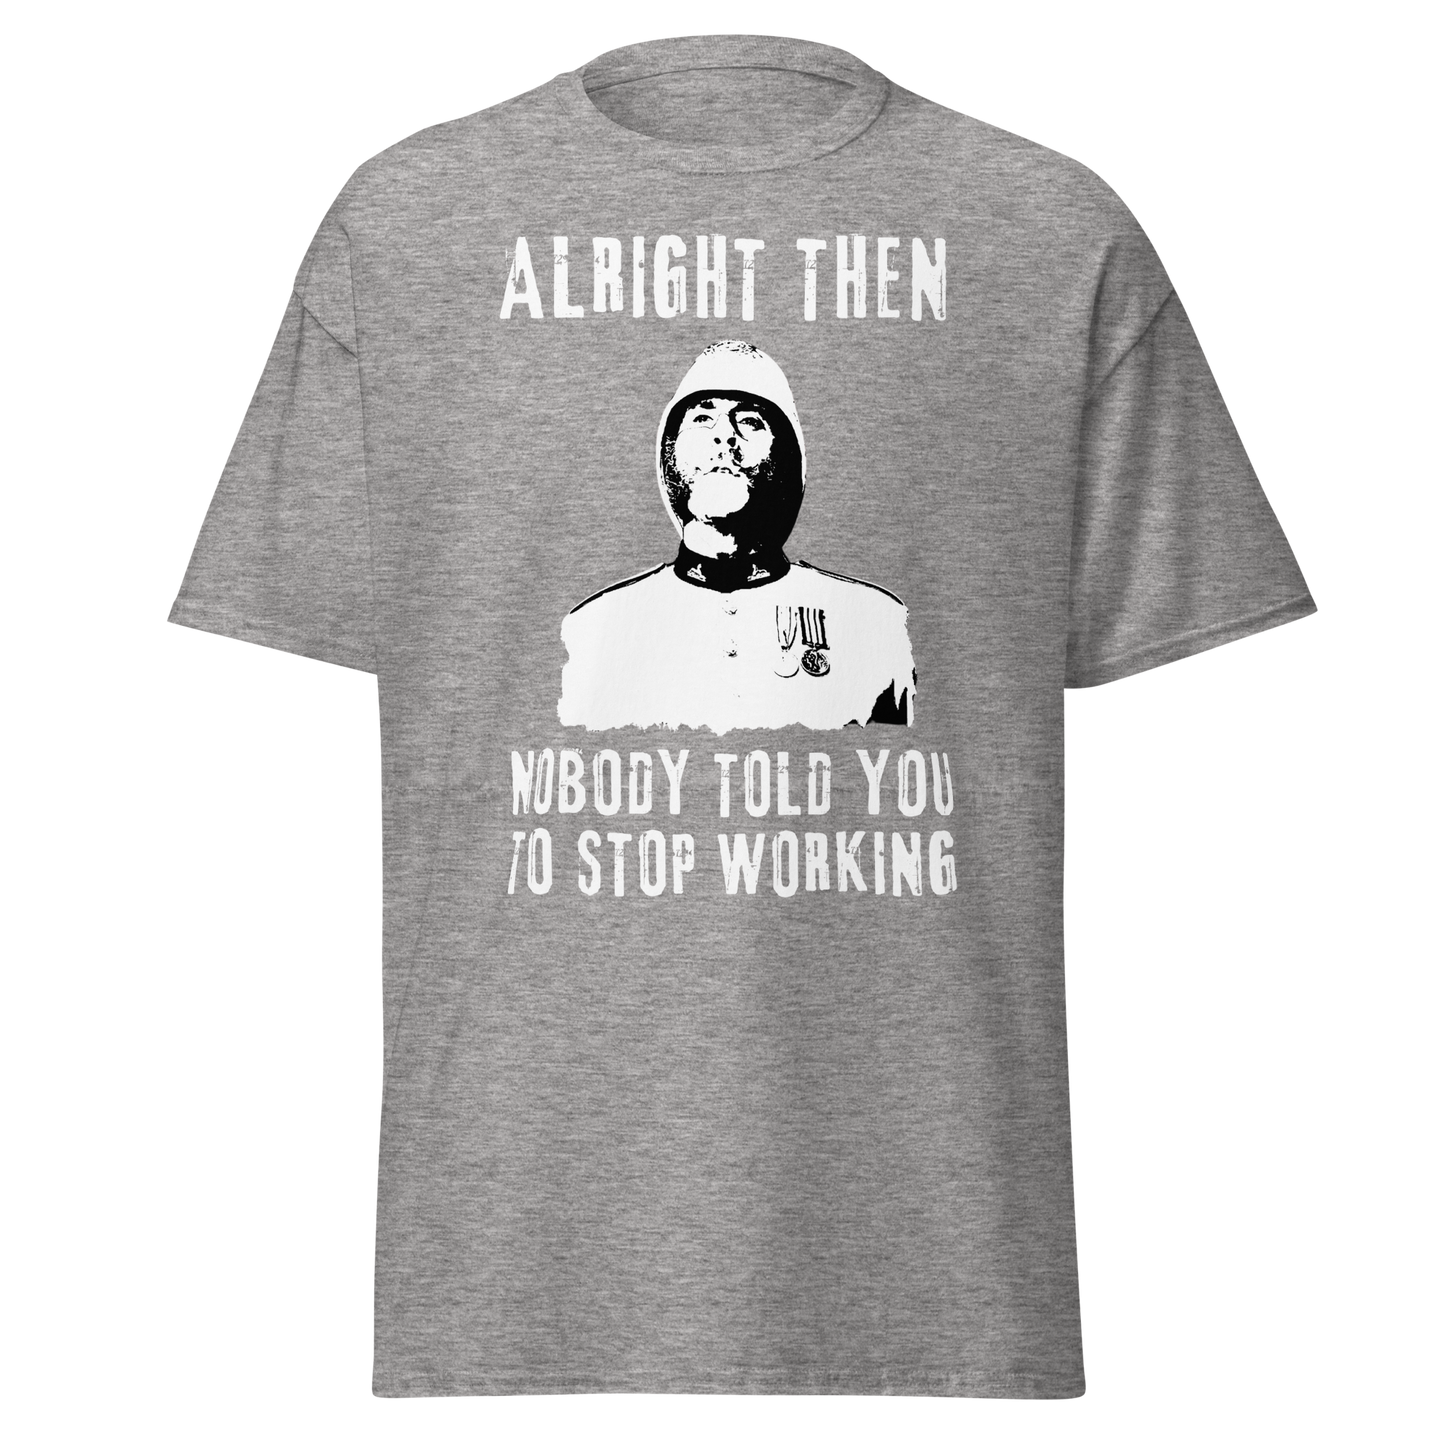 Alright Then, Nobody Told You To Stop Working (t-shirt)